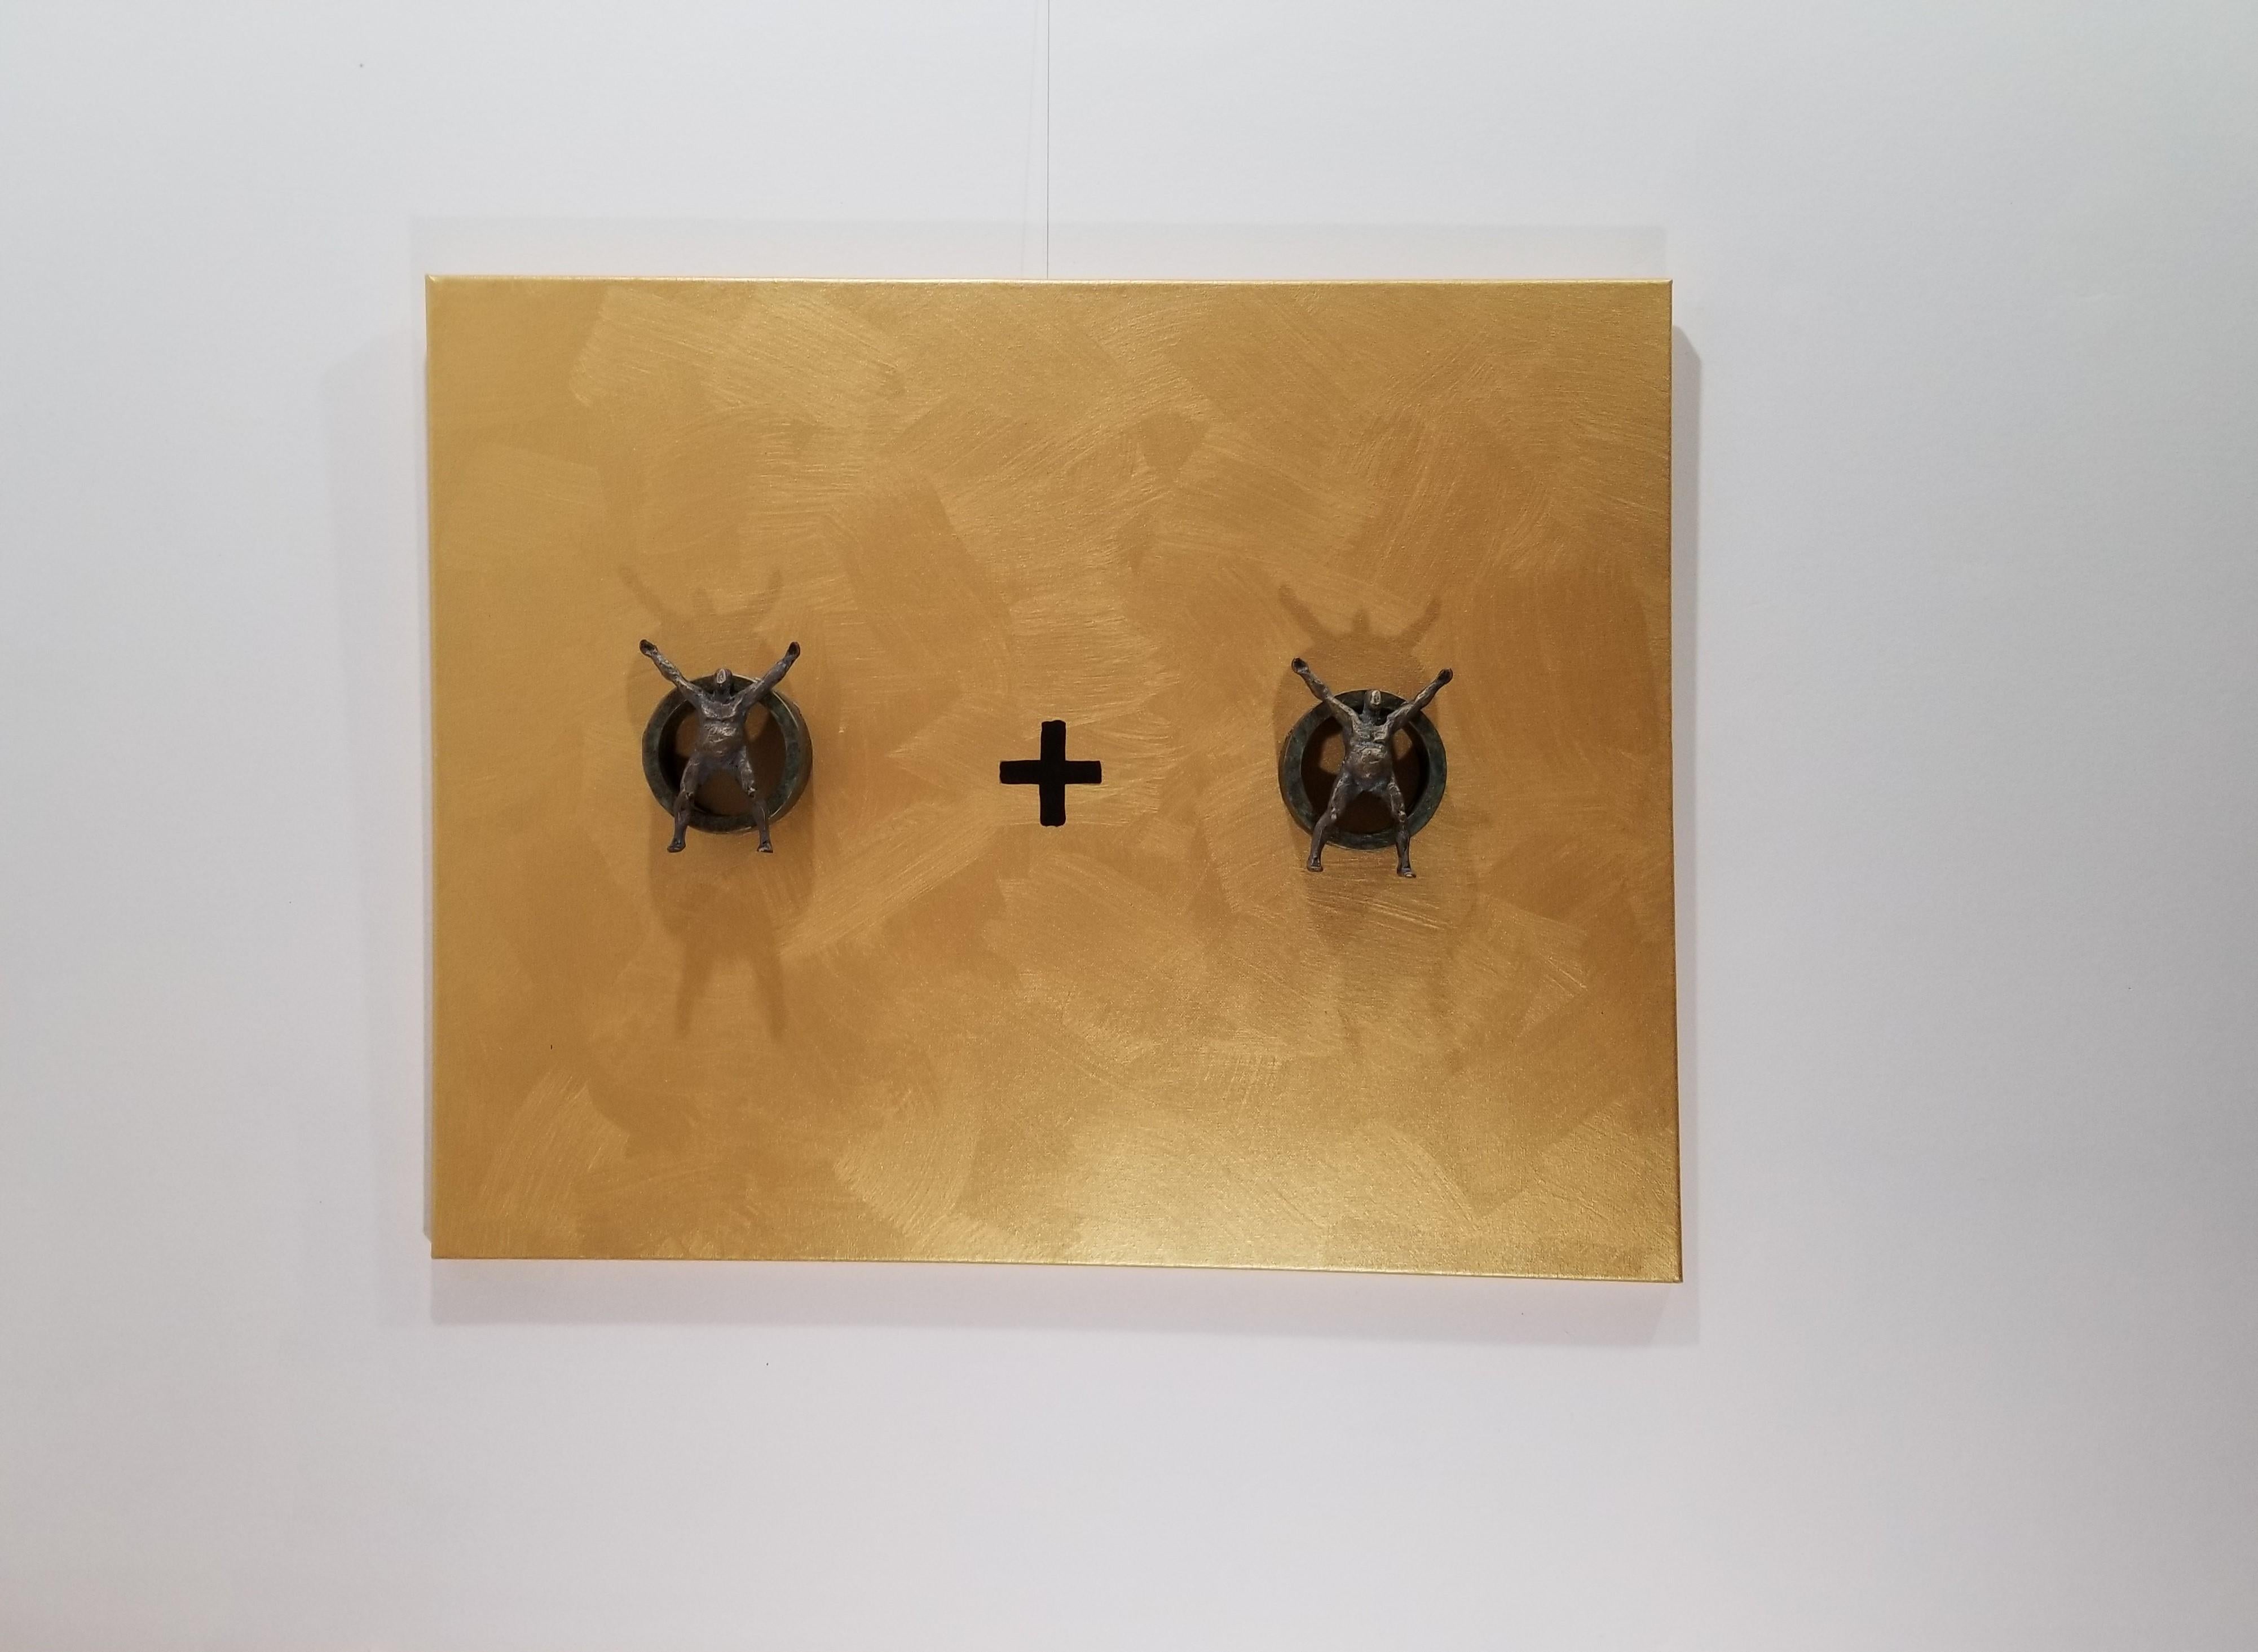 <p>Artist Comments<br>Artist Yelitza Diaz demonstrates a minimalist piece depicting figures and geometric structures in an equation. She borrows elements of minimalism and creates a new discourse that allows the viewer to identify even more with her